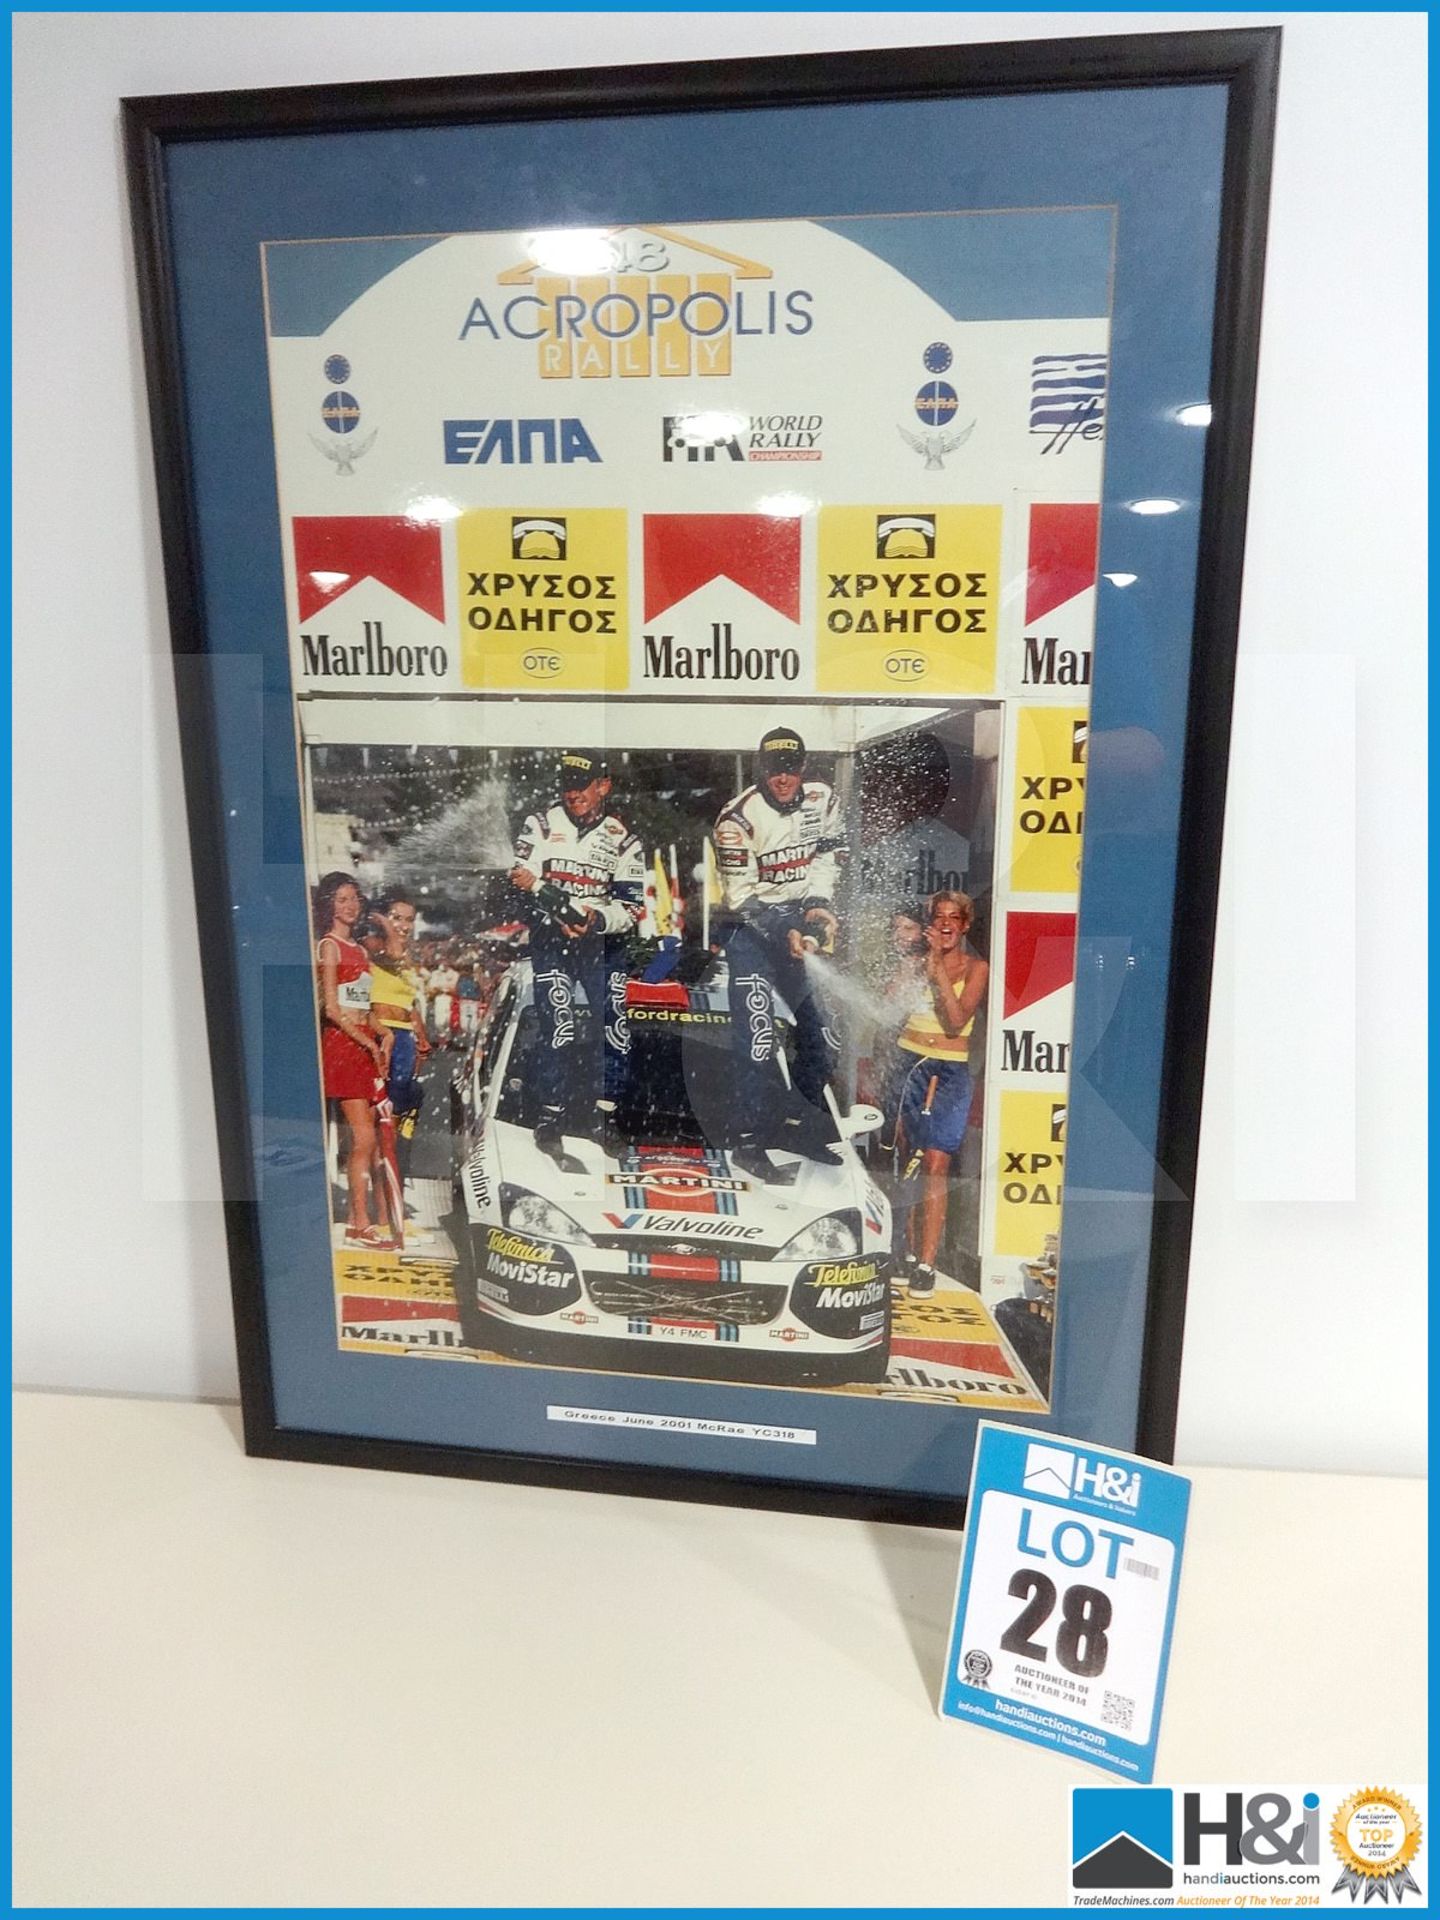 Framed Colin McRae Acropolis Rally podium win photograph. Greece June 2001 engine number YC318. Neve